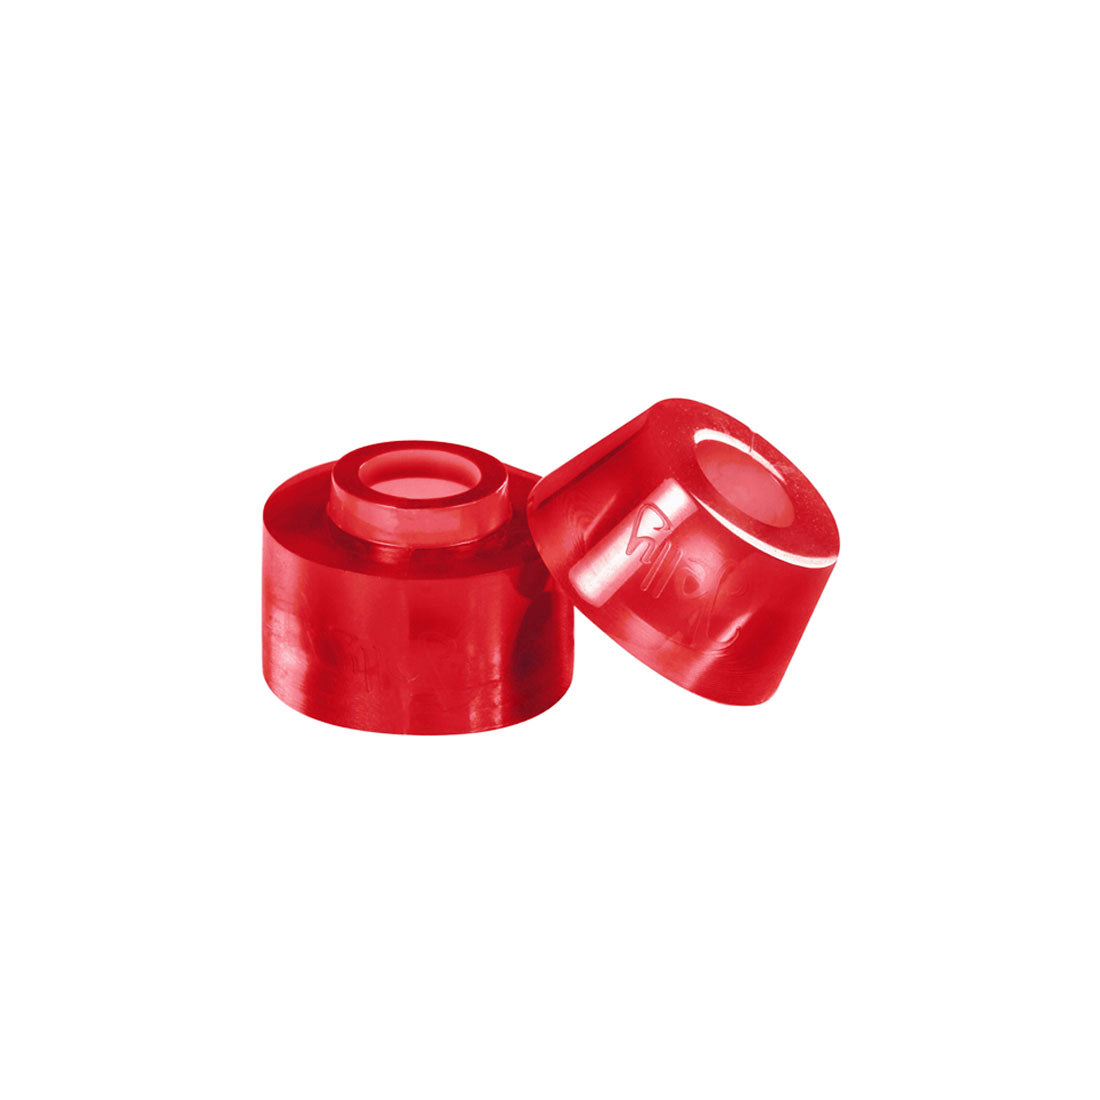 Chaya Jelly Interlock Cushions 85a 8pk - Red Roller Skate Hardware and Parts